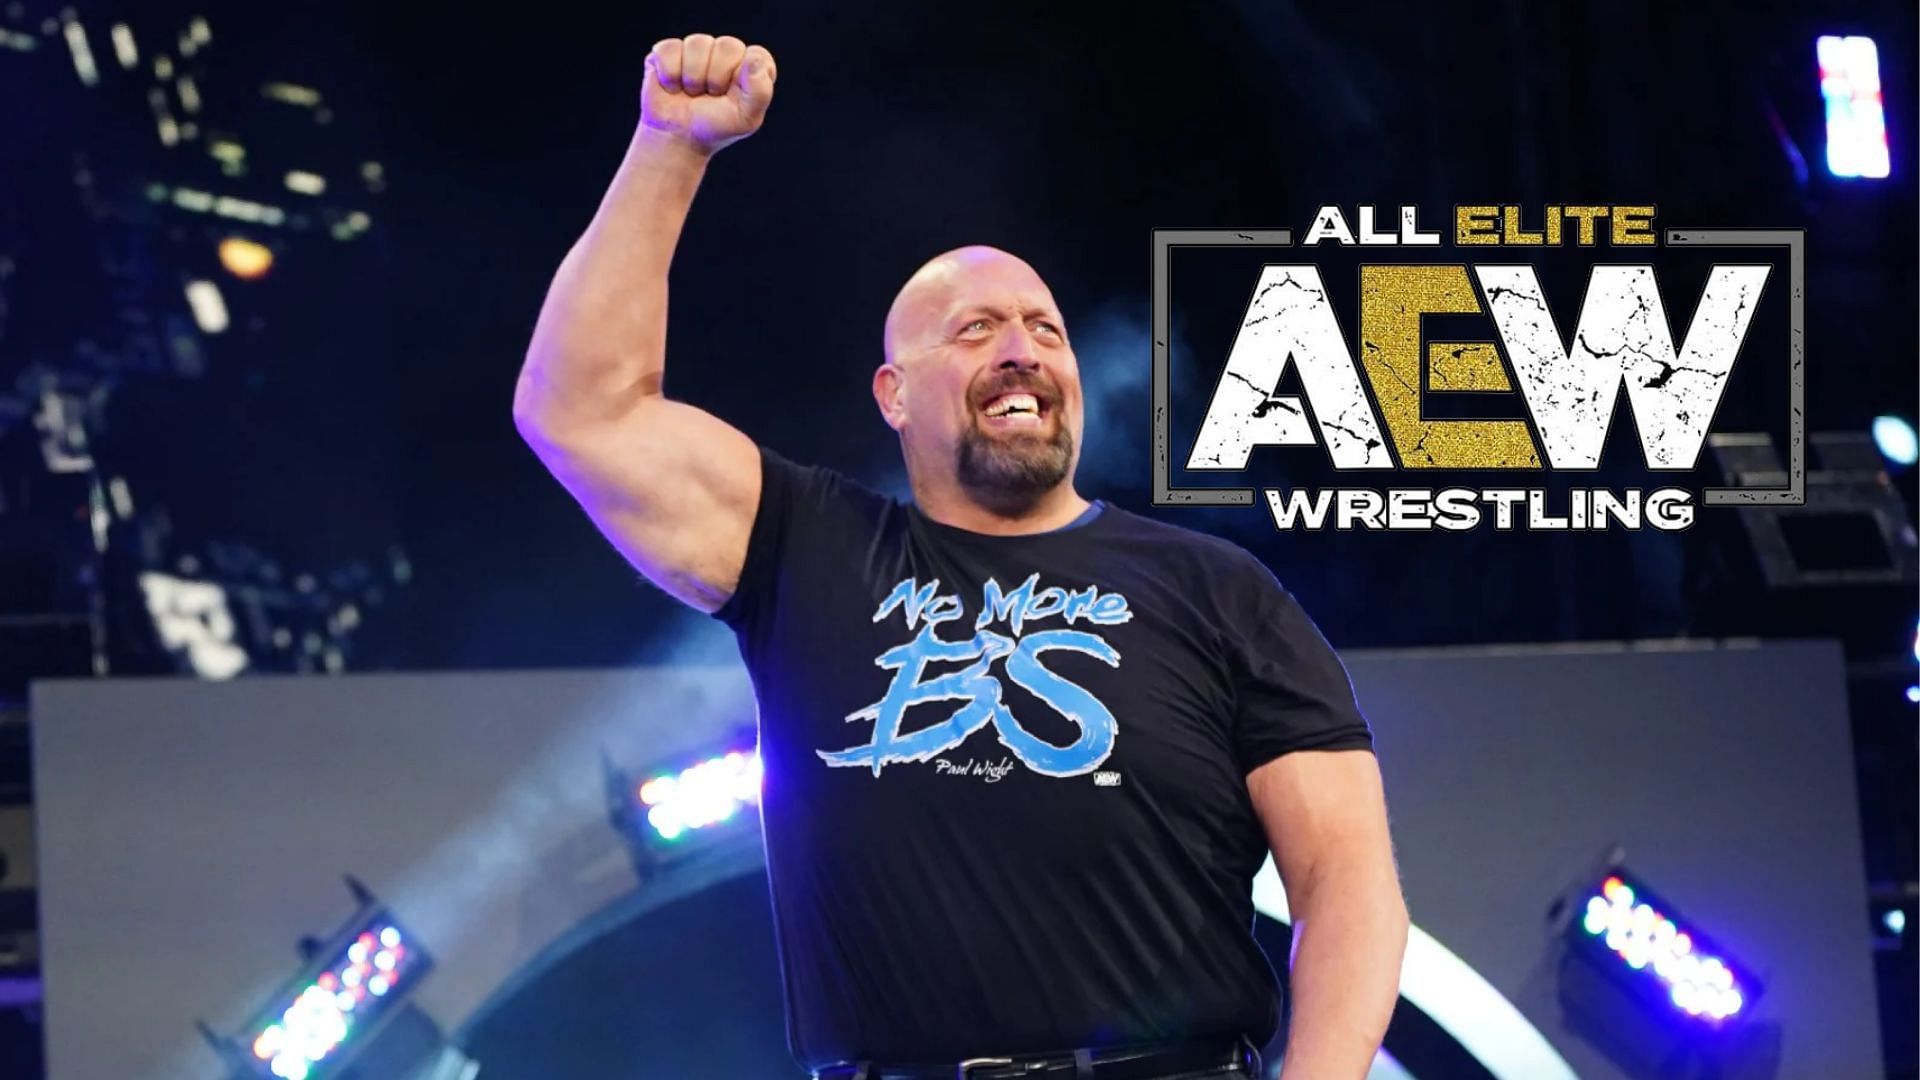 Paul Wight (fka The Big Show) revived an old gimmick on AEW Dynamite this week.